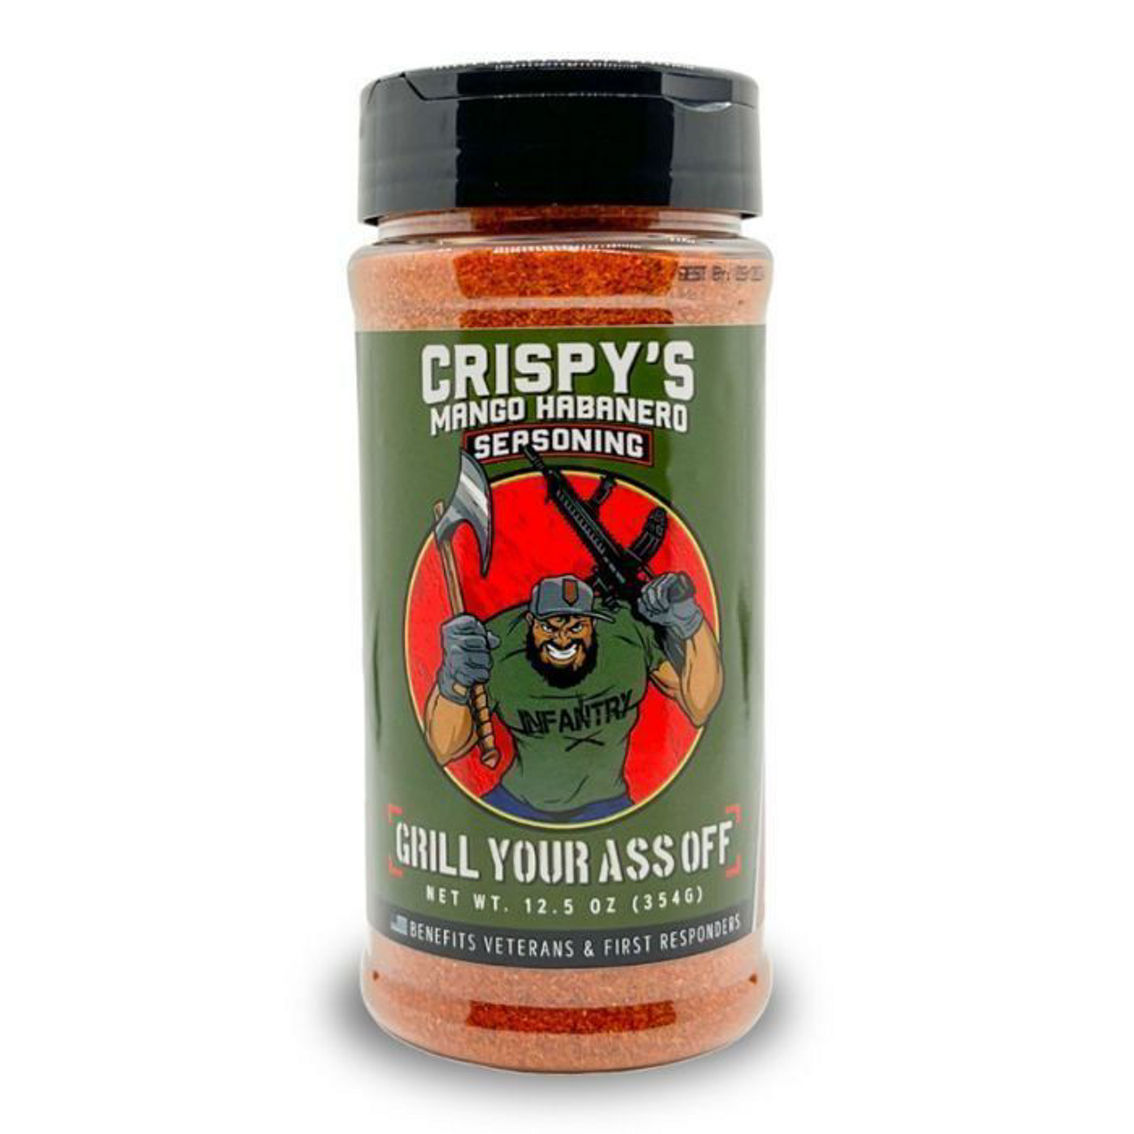 Grill Your A** Off Crispy's Mango Habanero - Image 2 of 2